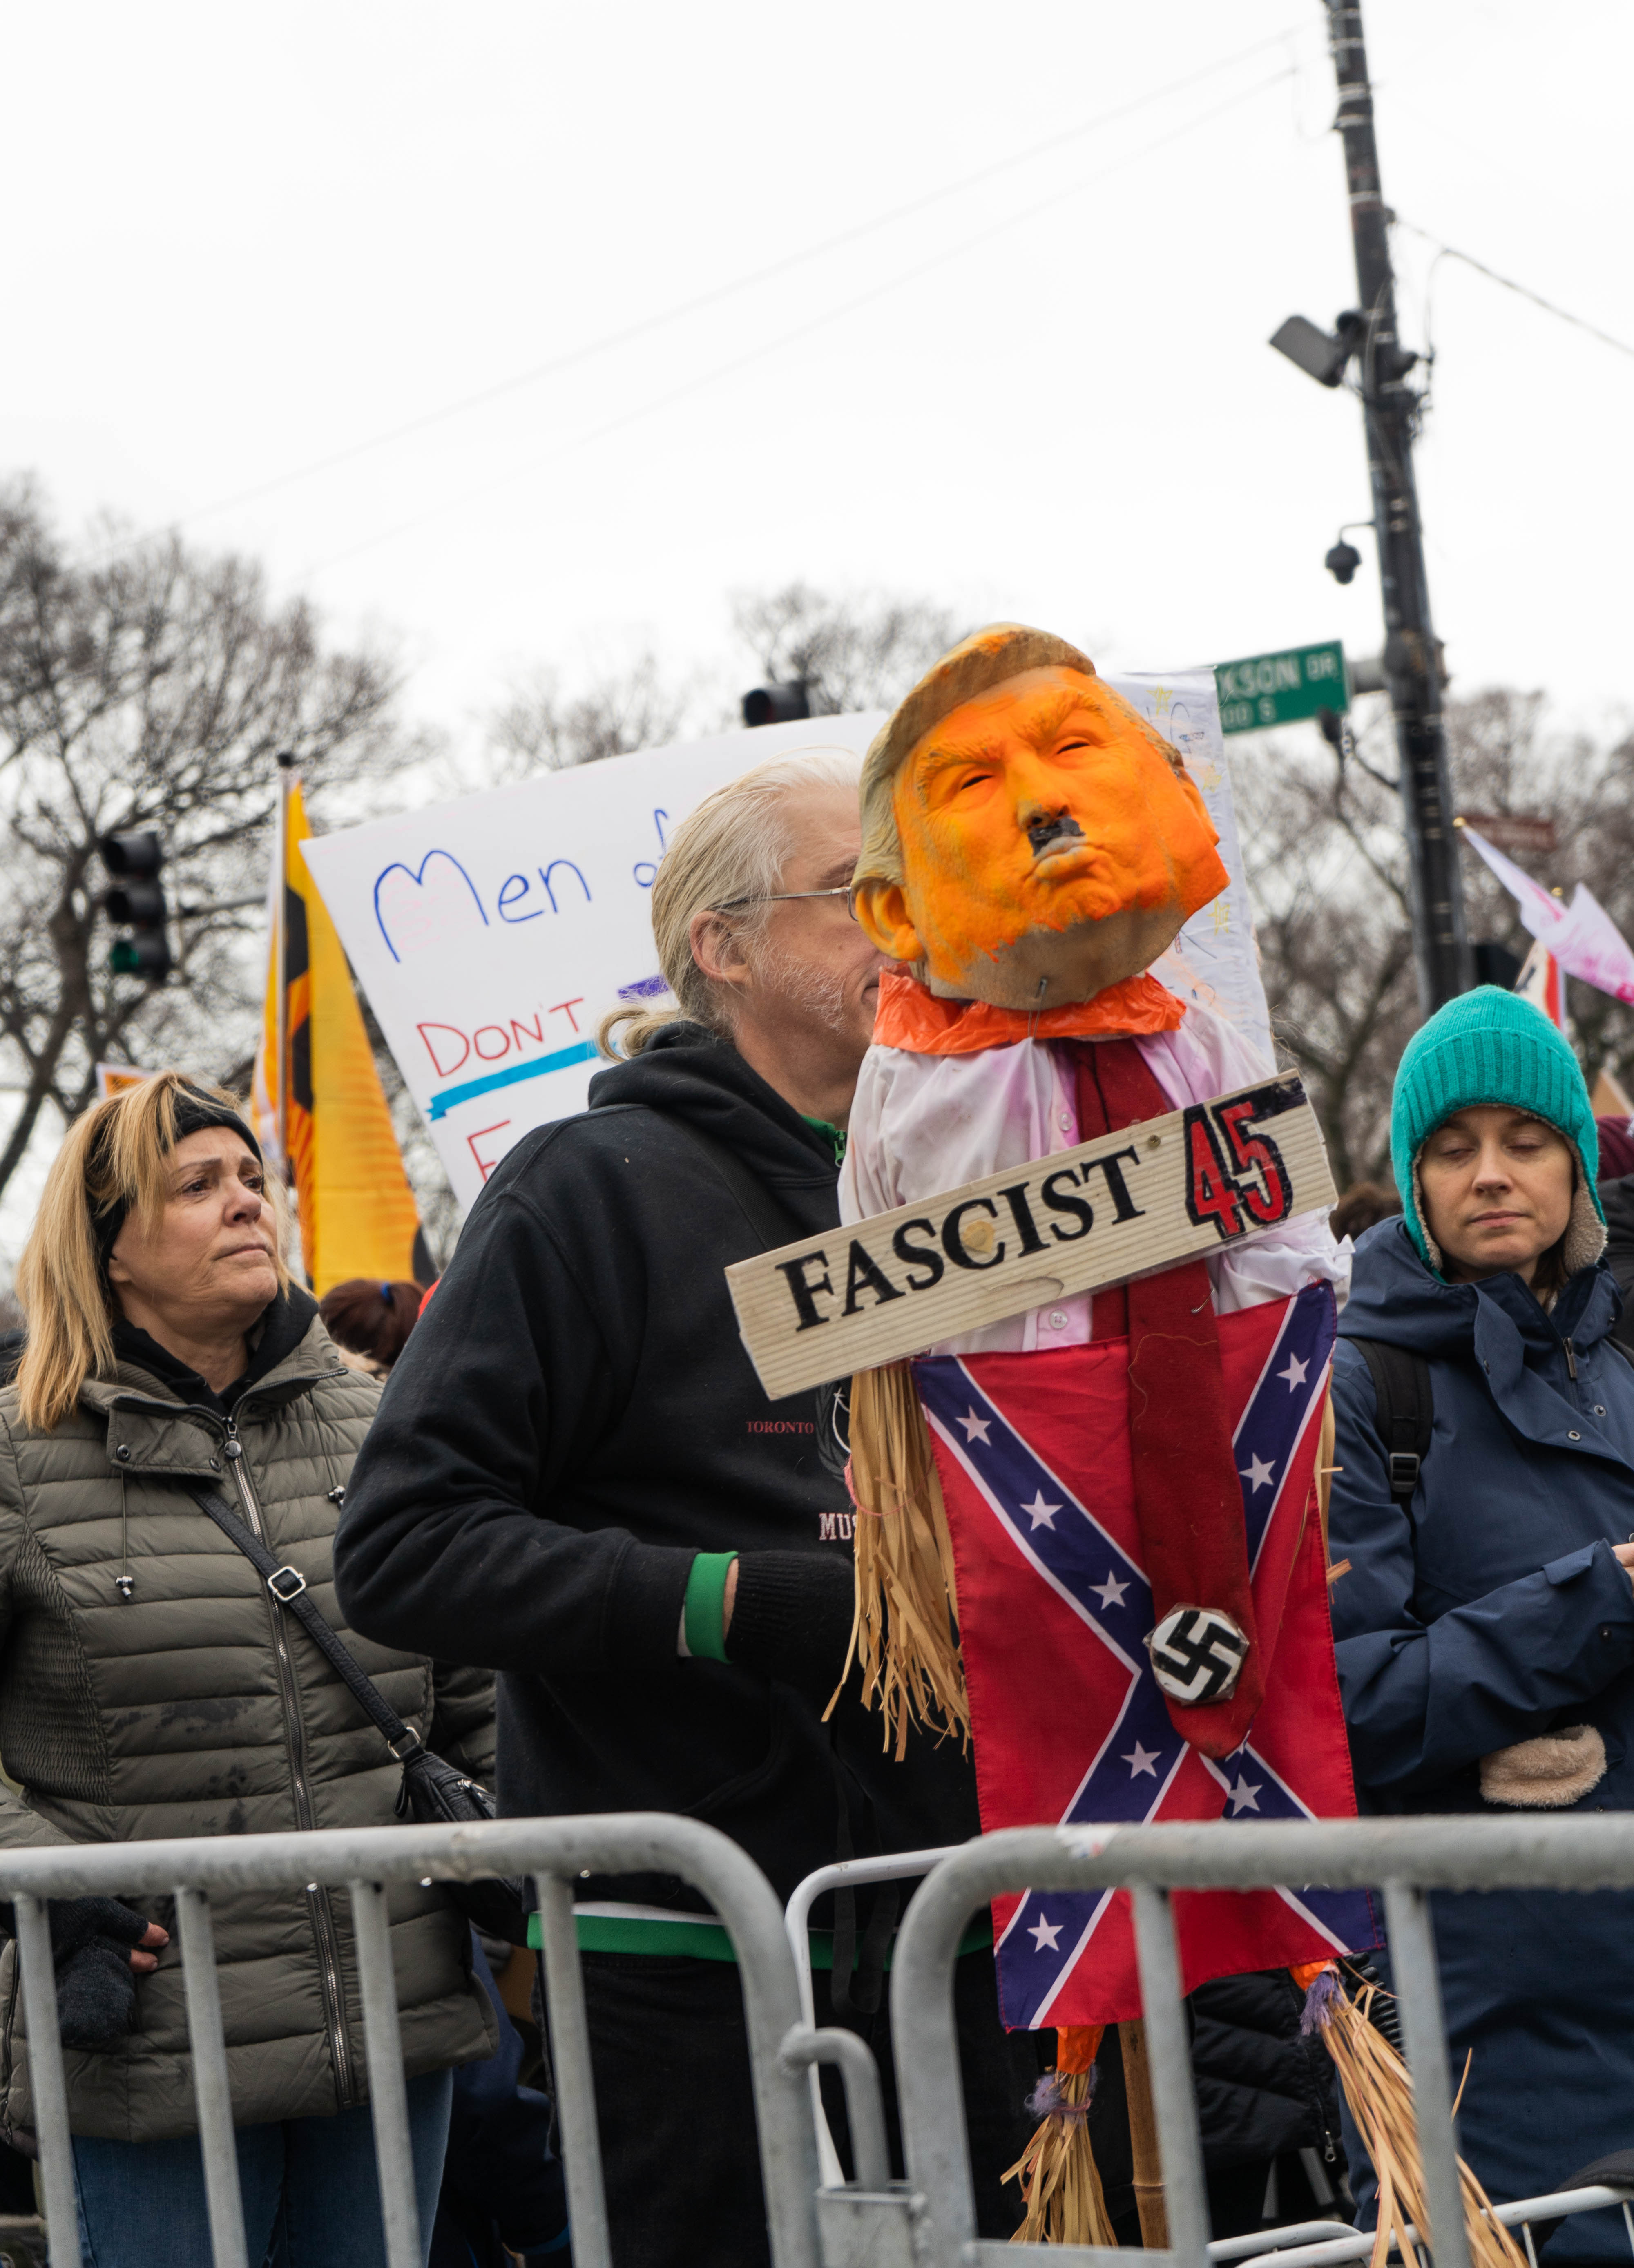 One protester carries a vividly orange mask of Donald Trump over a confederate flag and a sign reading "fascist."